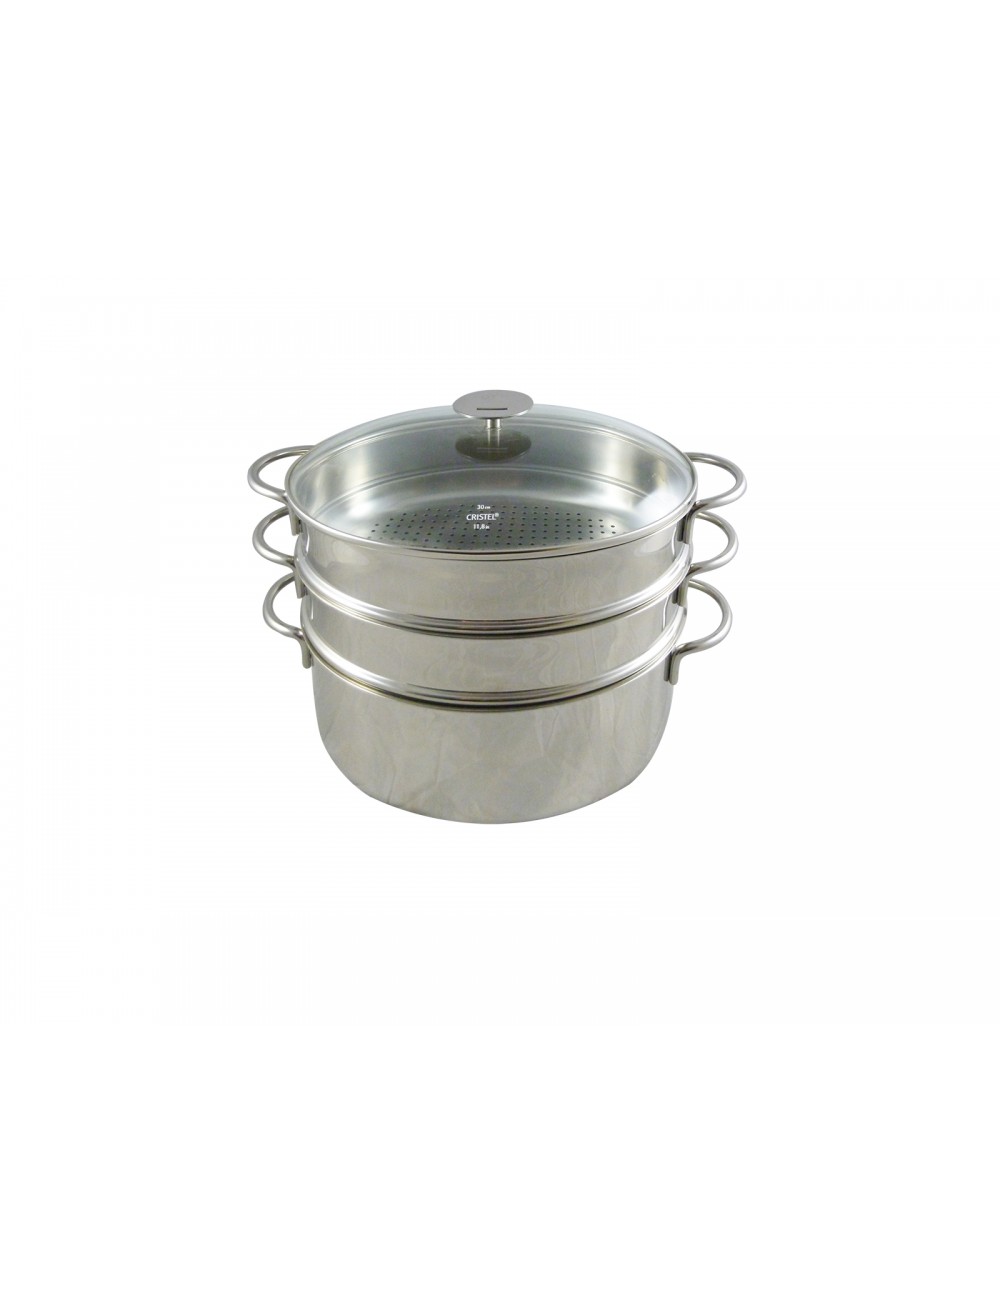 OVAL STEAM POT WITH 2 LEVELS - 30 CM - STAINLESS STEEL